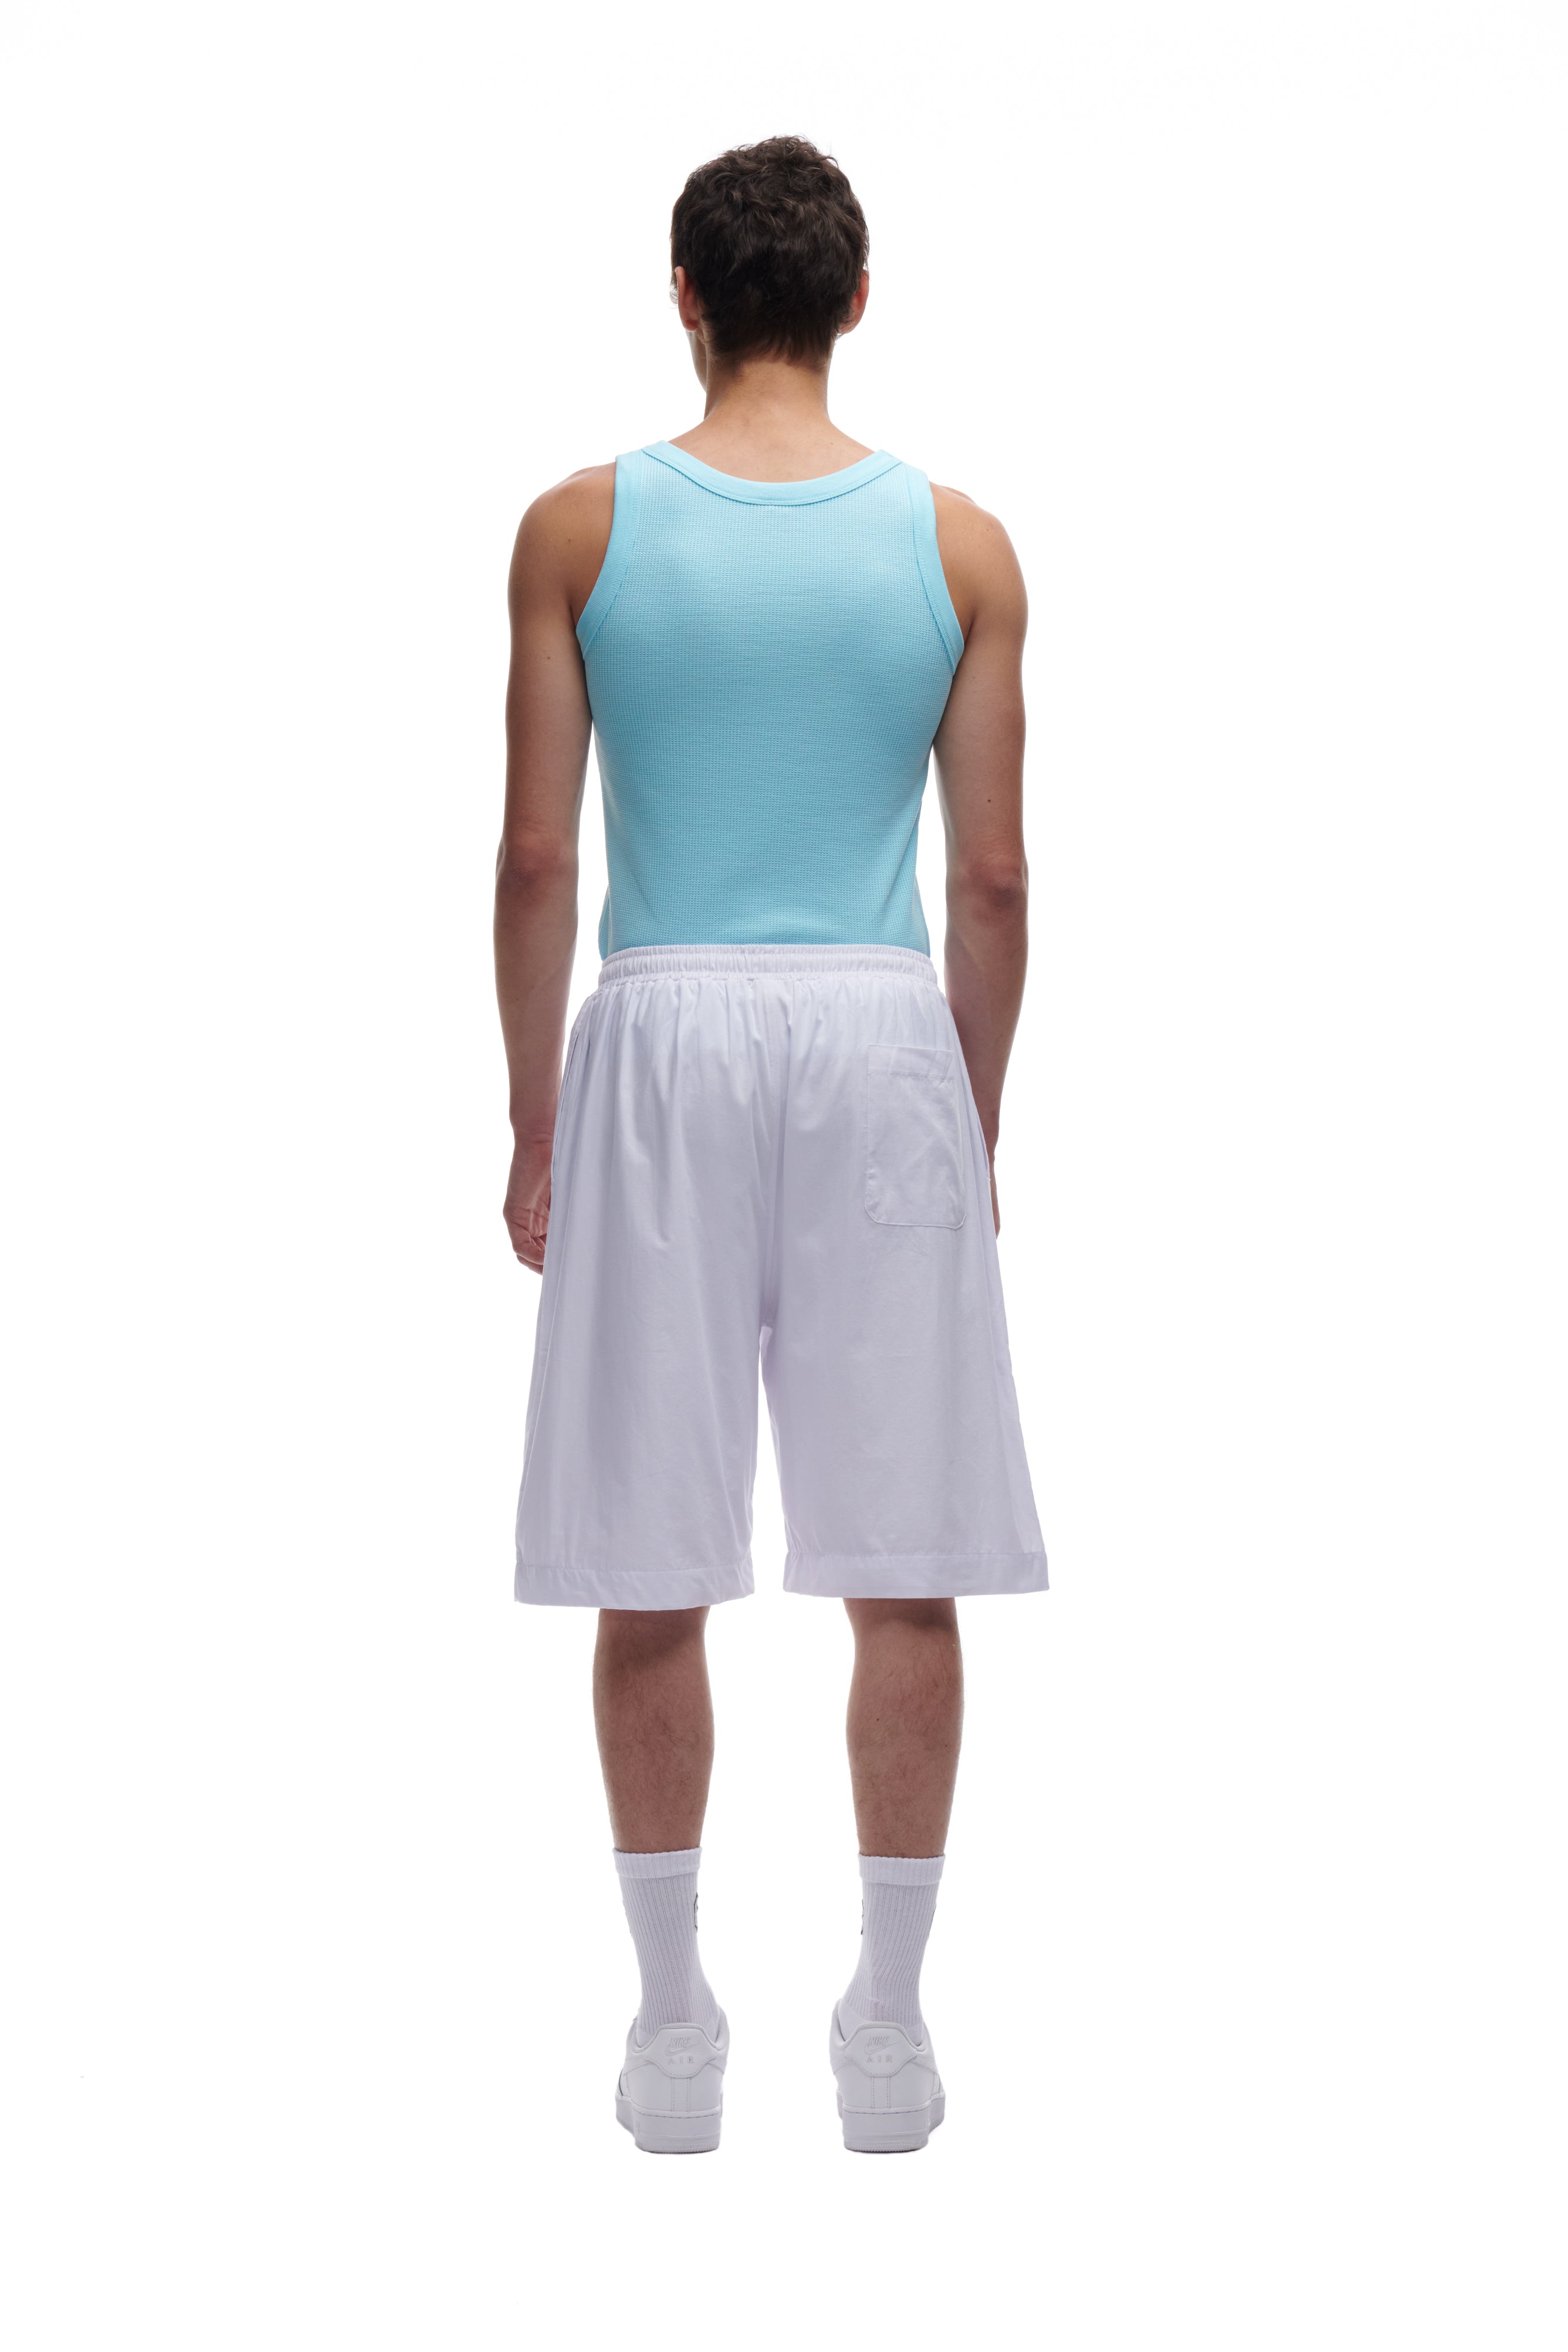 WAFFLE KNIT TANK TOP BABY BLUE